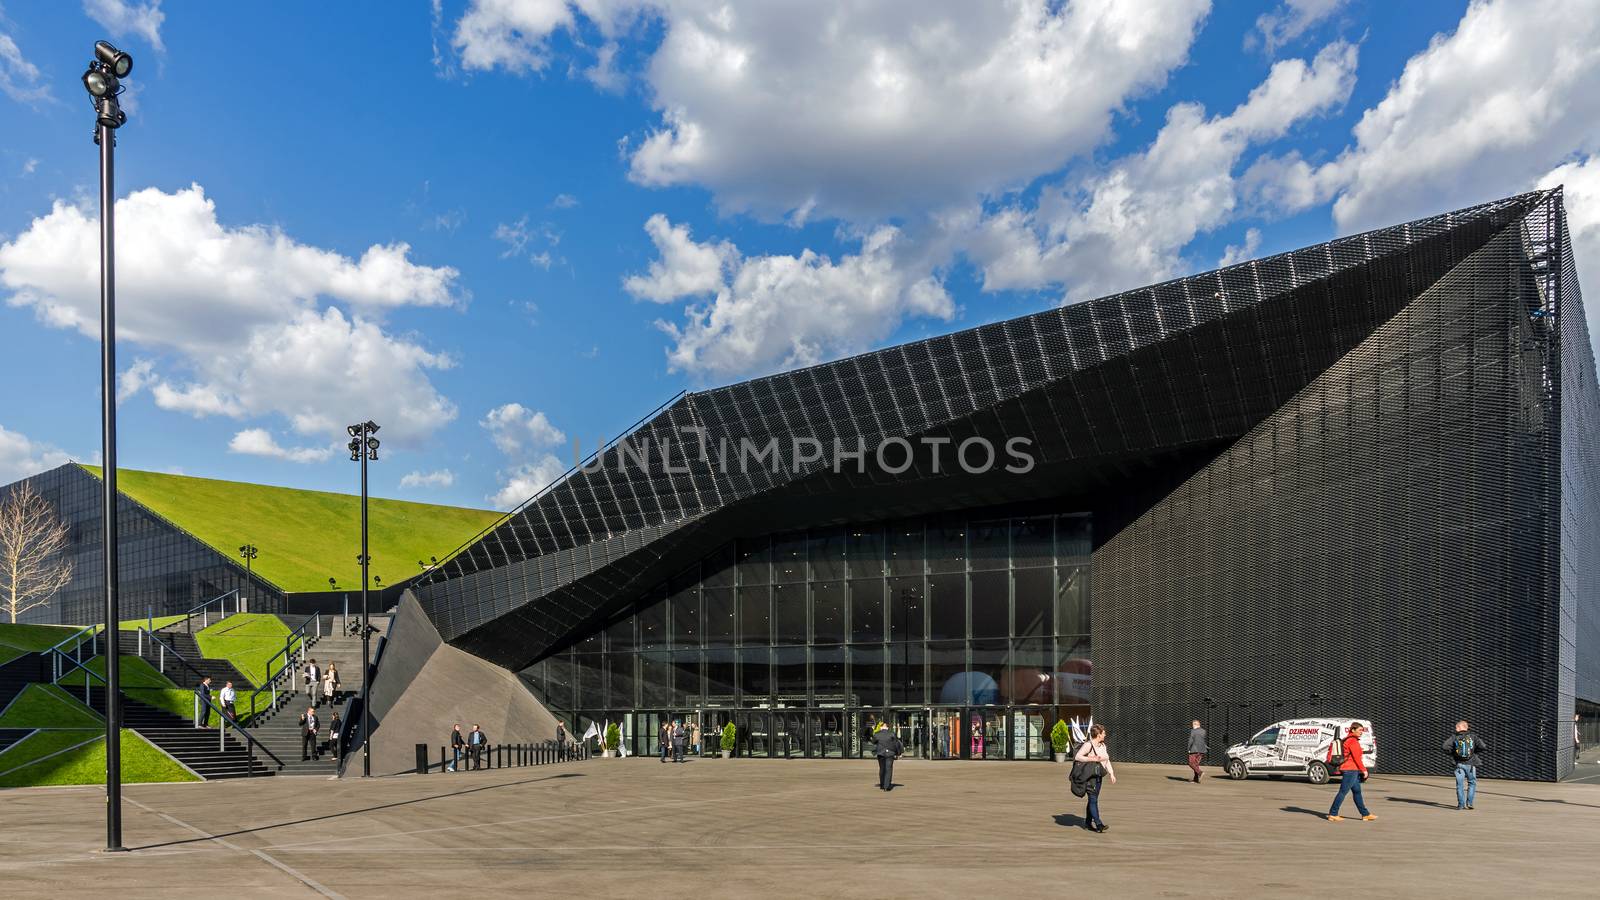 The International Conference Centre in Katowice, newly launched modern complex, officially opened during inaugural event, European Economic Congress, held on 20-22 April, 2015.